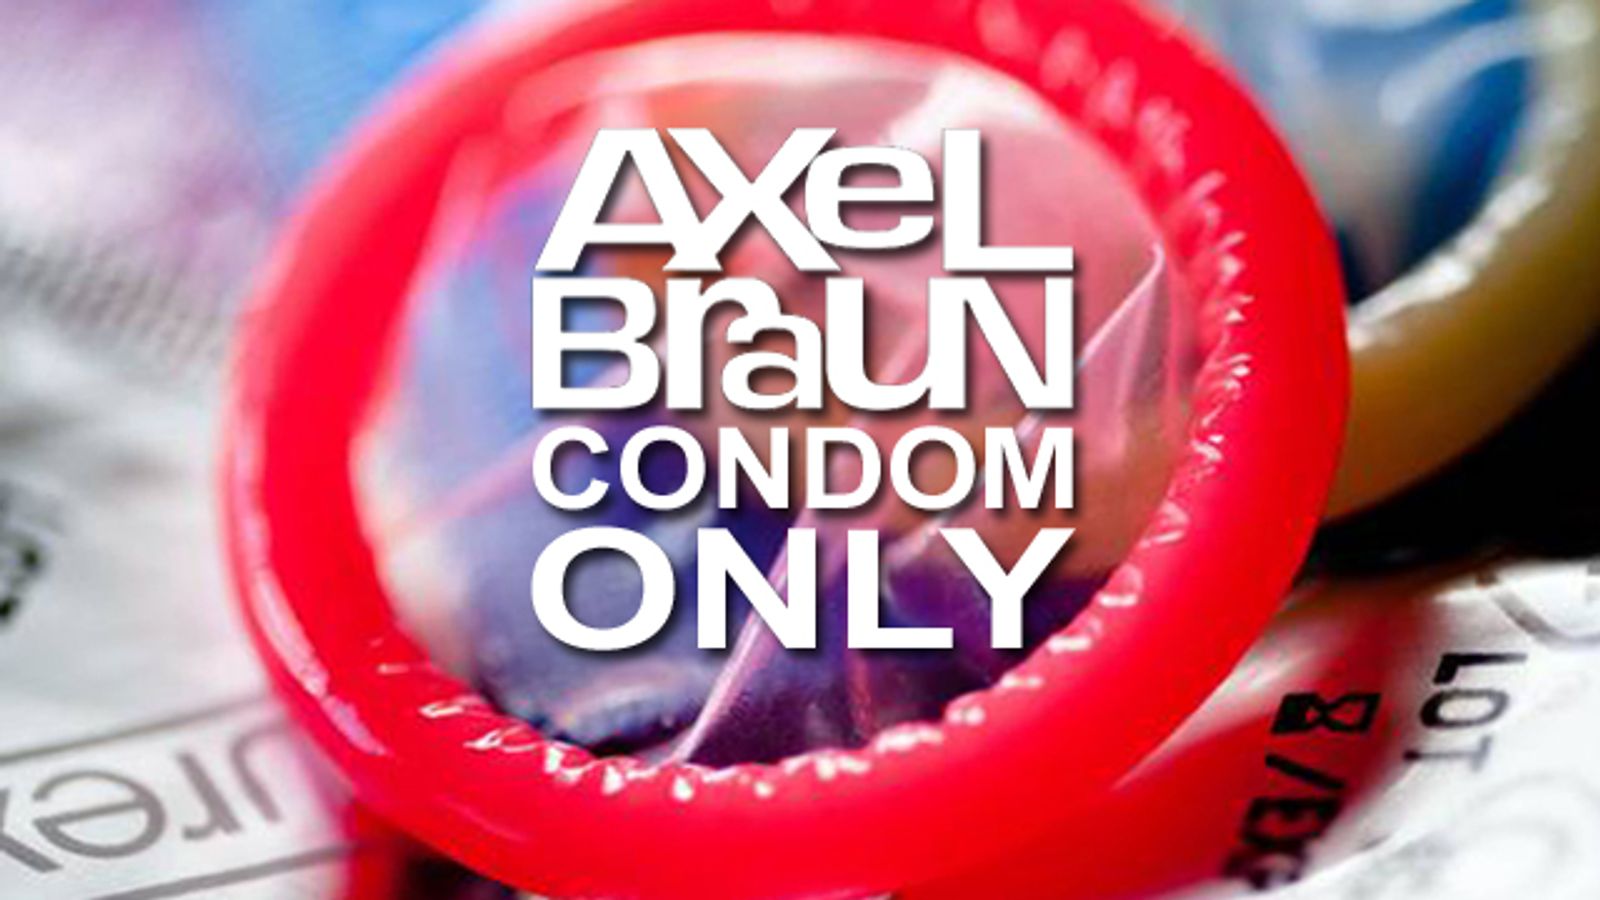 Axel Braun Adopts All-Condom, 7-Day Test Policies